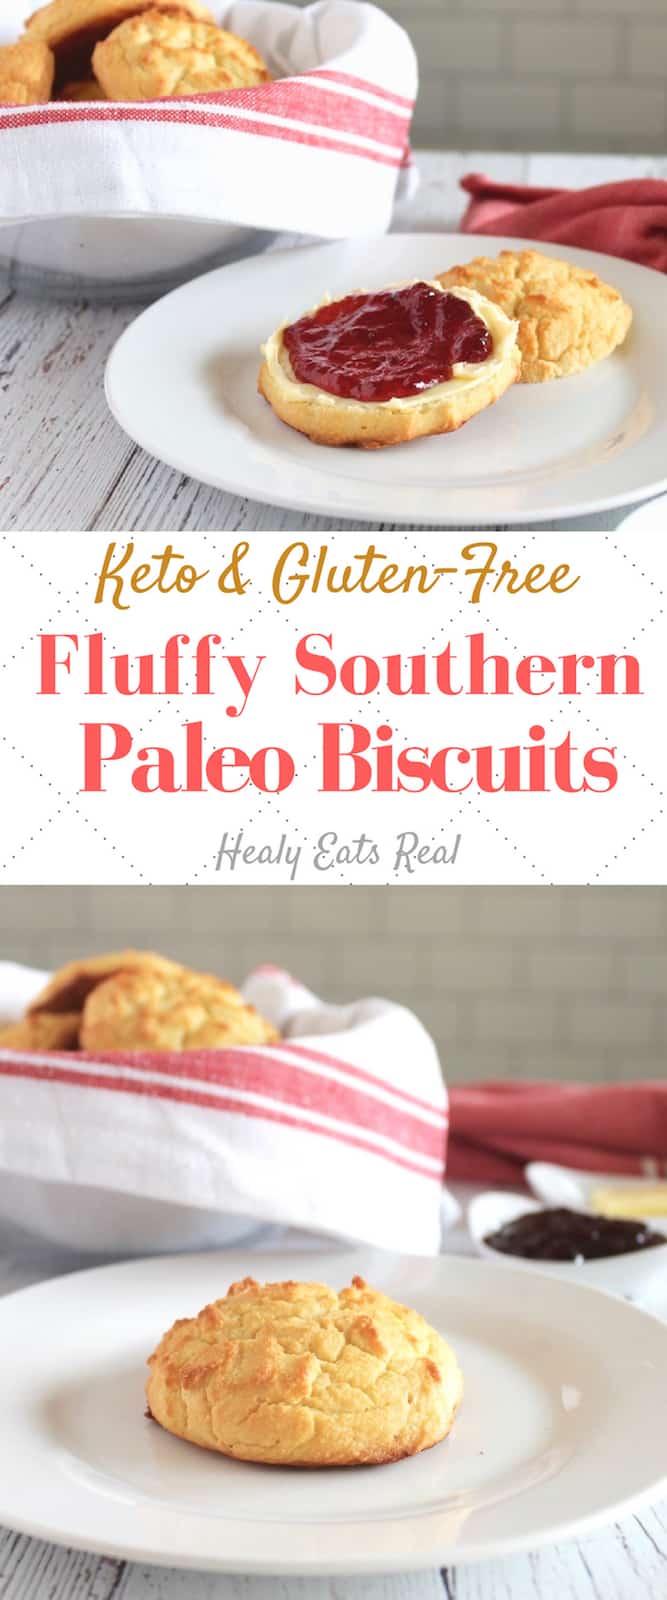 Southern Style Fluffy Paleo Biscuits (Keto & Low Carb)